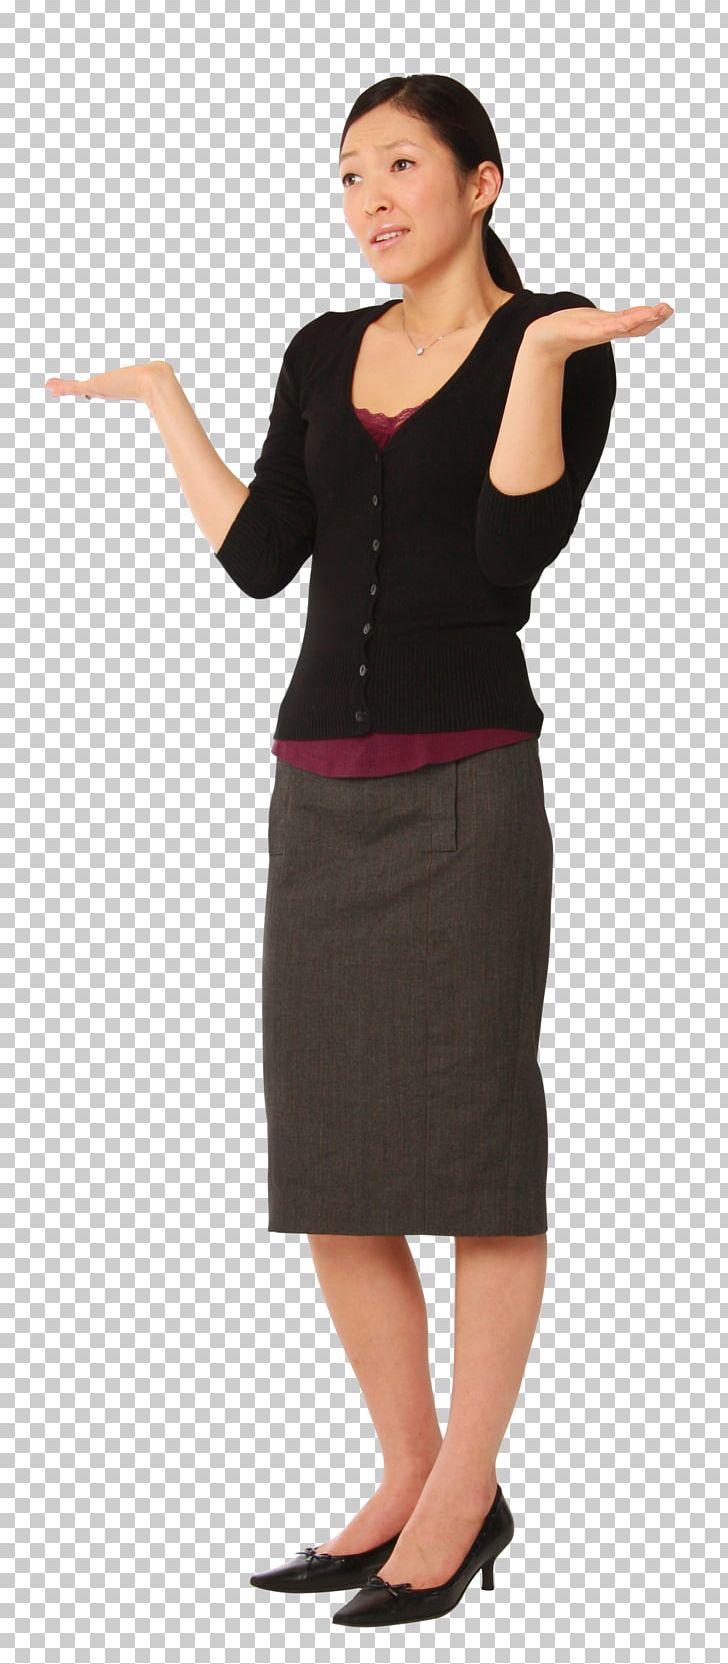 Woman Businessperson Dress Pencil Skirt PNG, Clipart, Abdomen, Arm, Business, Businessperson, Clothing Free PNG Download